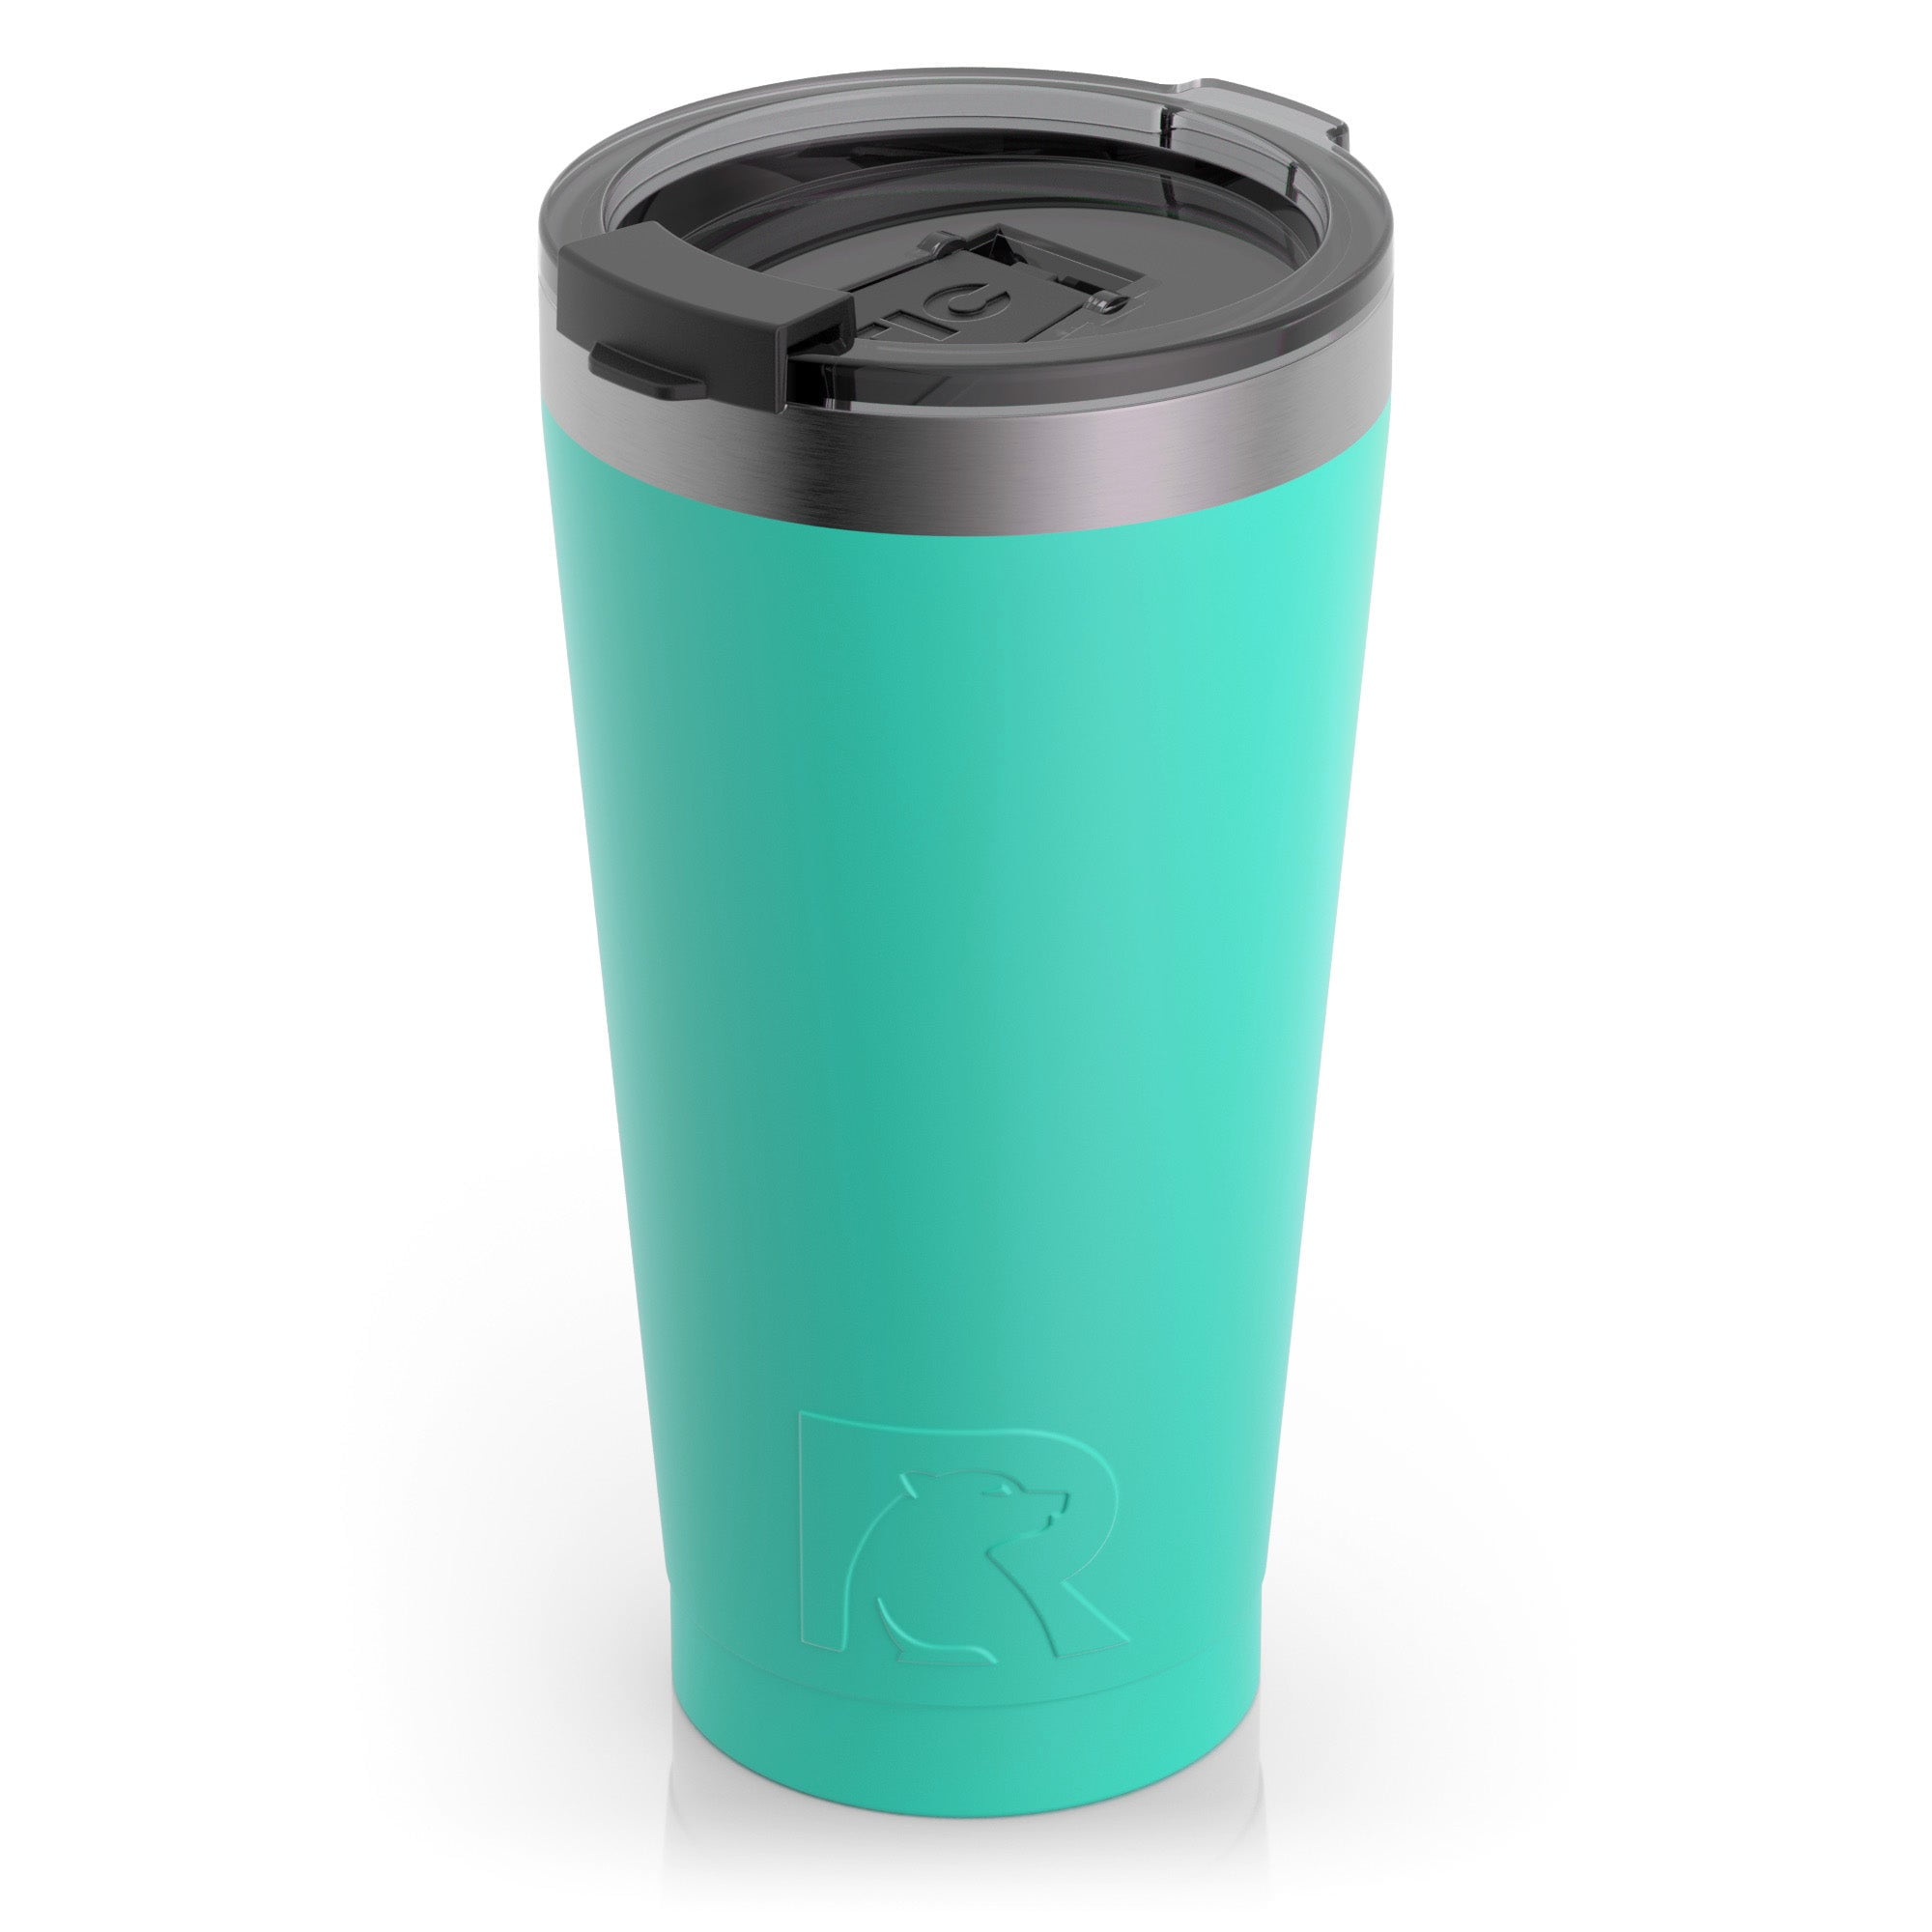 RTIC 16 oz Coffee Travel Mug with Lid and Handle, Stainless Steel Vacuum-Insulated  Mugs, Leak, Spill Proof, Hot Beverage and Cold, Portable Thermal Tumbler Cup  for Car, Camping, Freedom Blue 